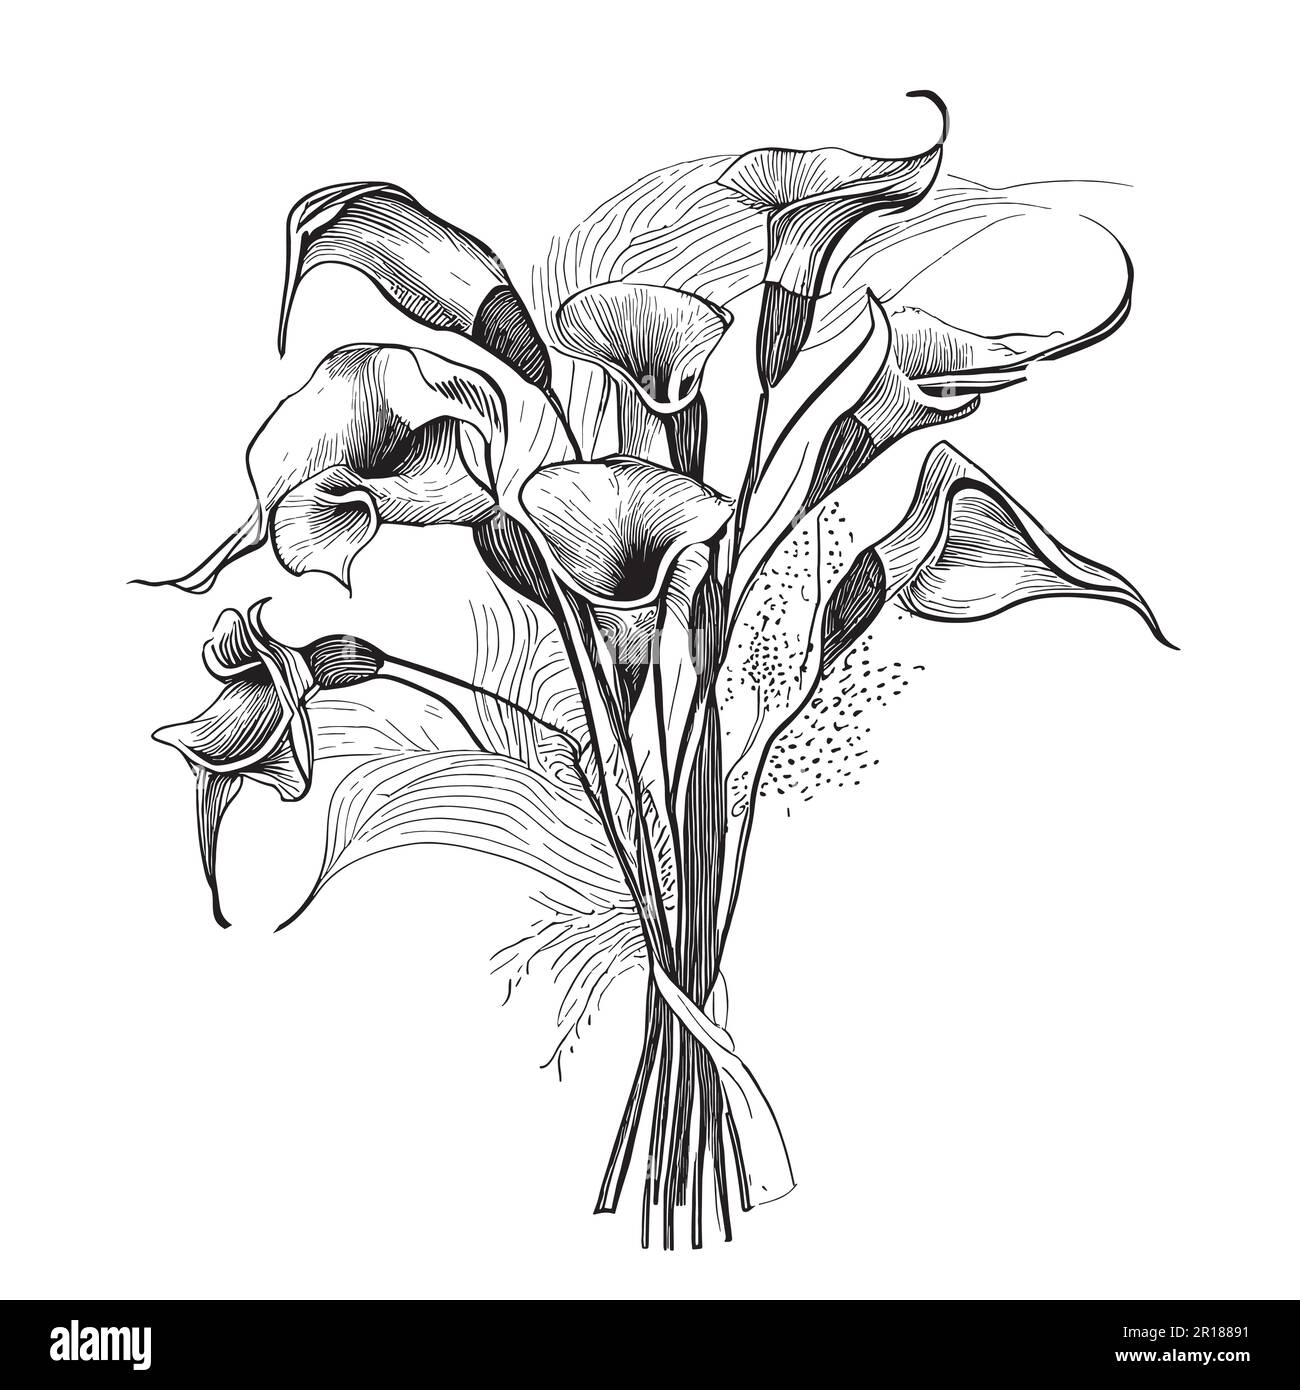 Calla lily bouquet hand drawn sketch in doodle style illustration Stock Vector